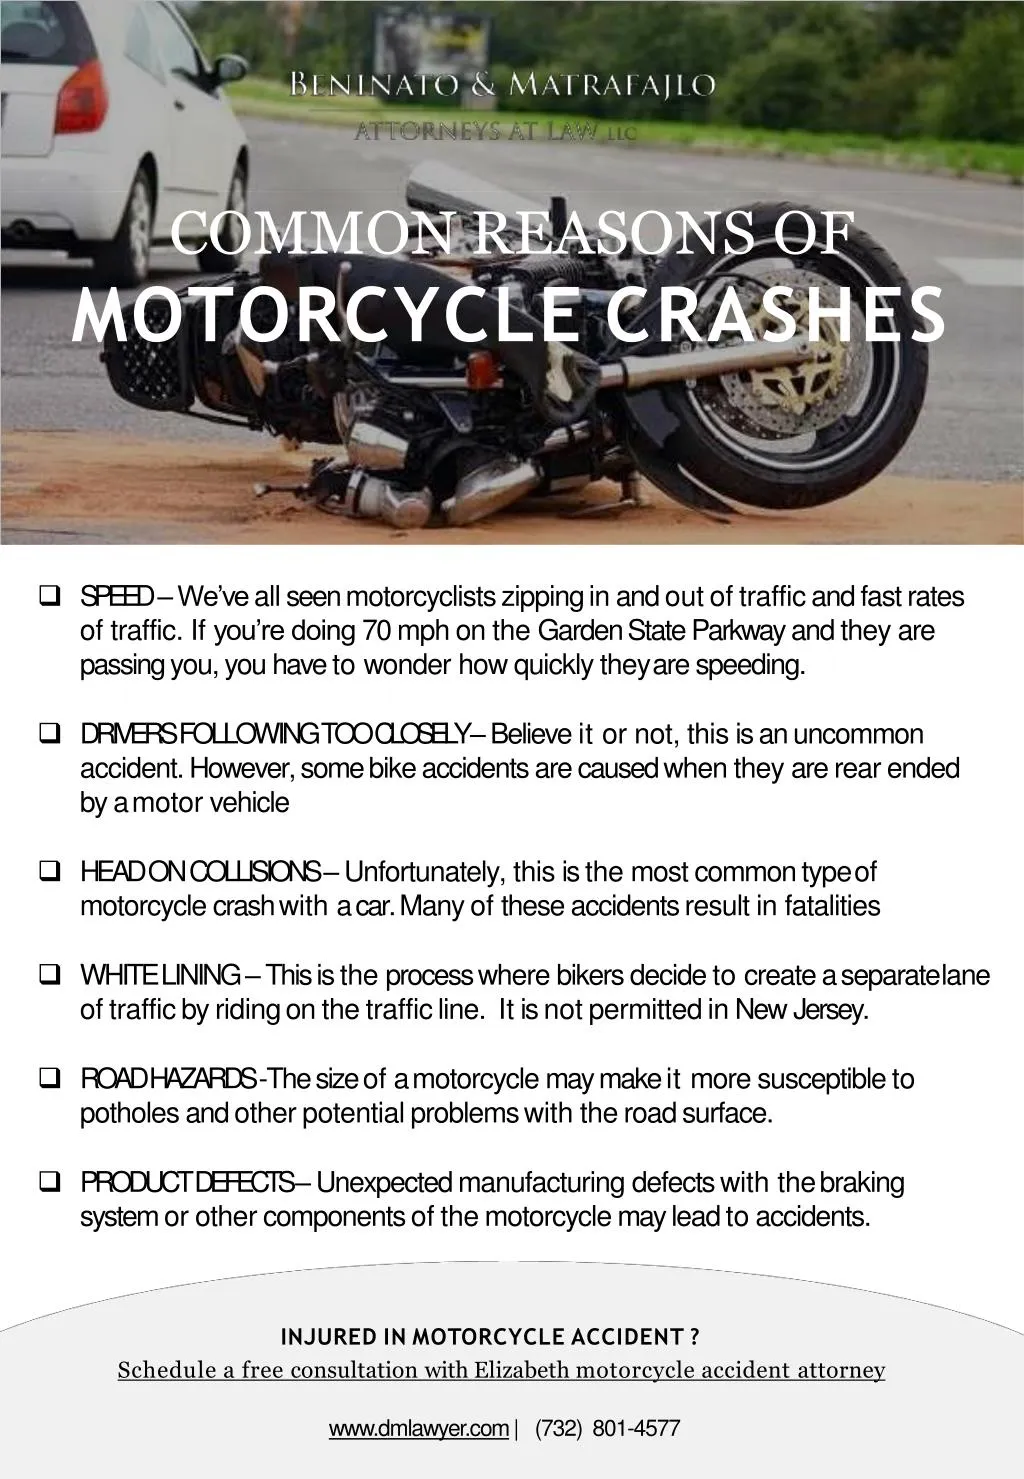 common reasons of motorcycle crashes